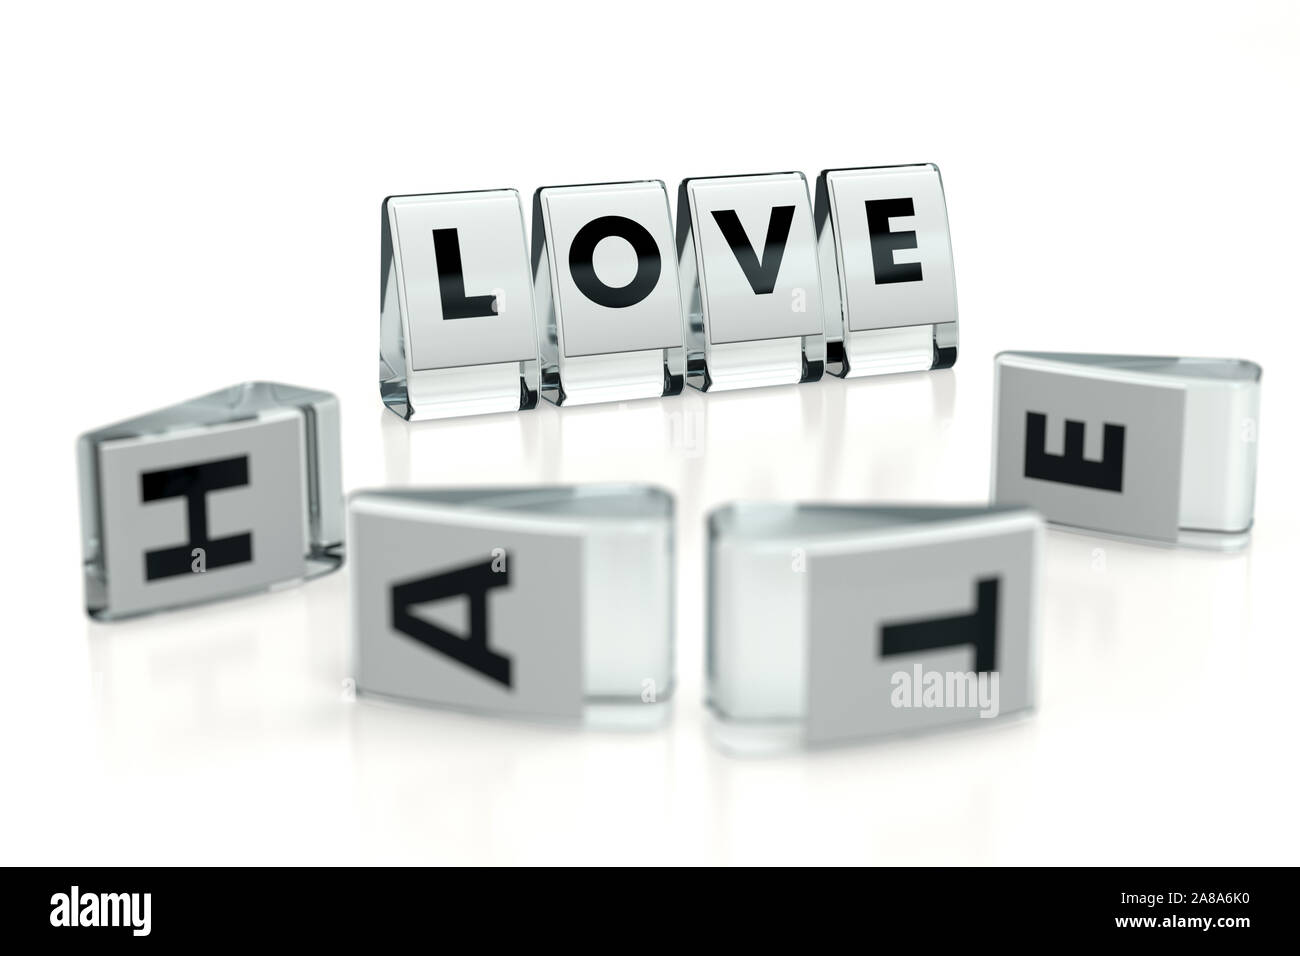 LOVE word written on glossy blocks and fallen over blurry blocks with HATE letters. Love wins, hate loses - concept. 3D rendering Stock Photo